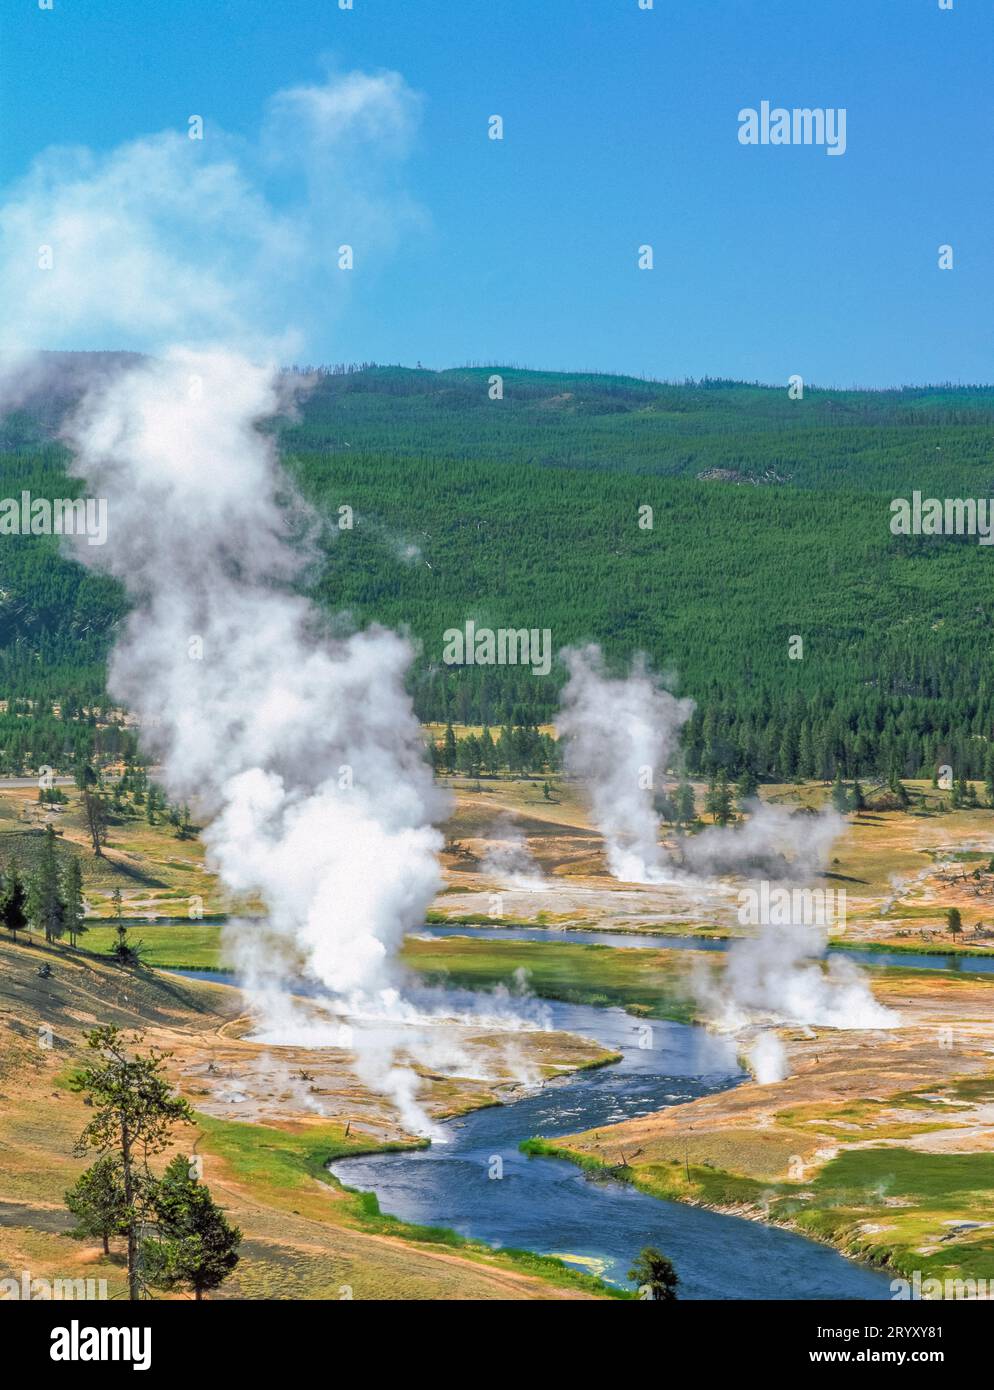 steam rising from hot springs along the firehole river in yellowstone national park, wyoming Stock Photo